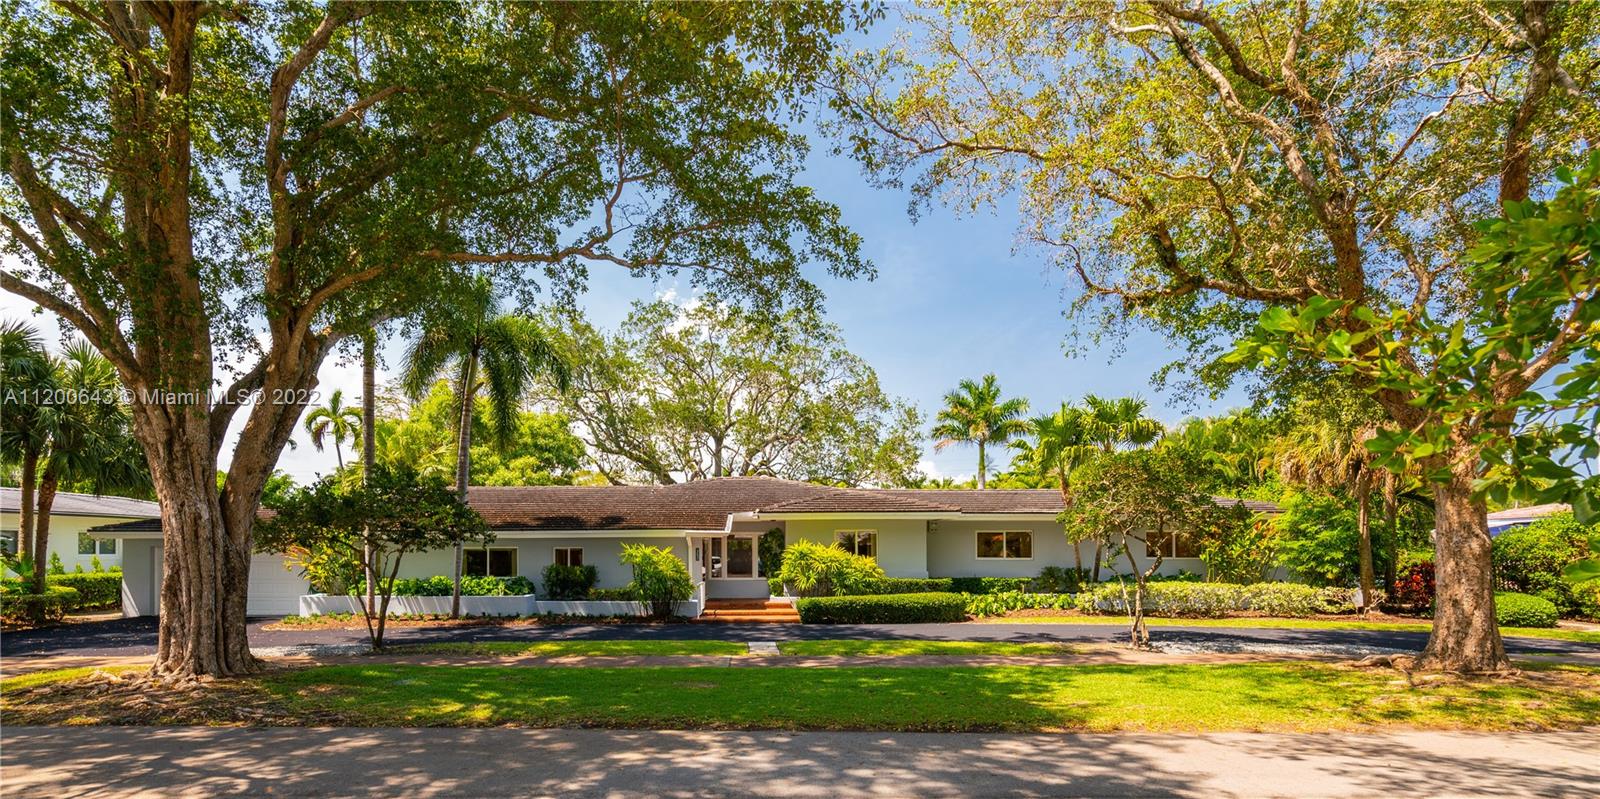 A treasured home in Coral Gables is now available for one lucky Buyer. Situated on a private, sun-dappled 18,750’ lot, this bright, one-story, 4 bedroom, 3.5 bath home is located on one of Coral Gables' finest streets, just 3 blocks from the historic French Village. The excellent floorplan graciously flows from one room to another and includes French doors lining the rear of the home. There is a sunny, eat-in kitchen with walk-in and butler’s pantry and features a large formal dining area with crown moldings throughout. The master suite and closet are sure to impress and, along with the family room, face an amazing oak-laden garden, deck and glamorous pool. The home is generator ready and features impact windows, tons of storage space and a 2-car garage. A Very Special Home.